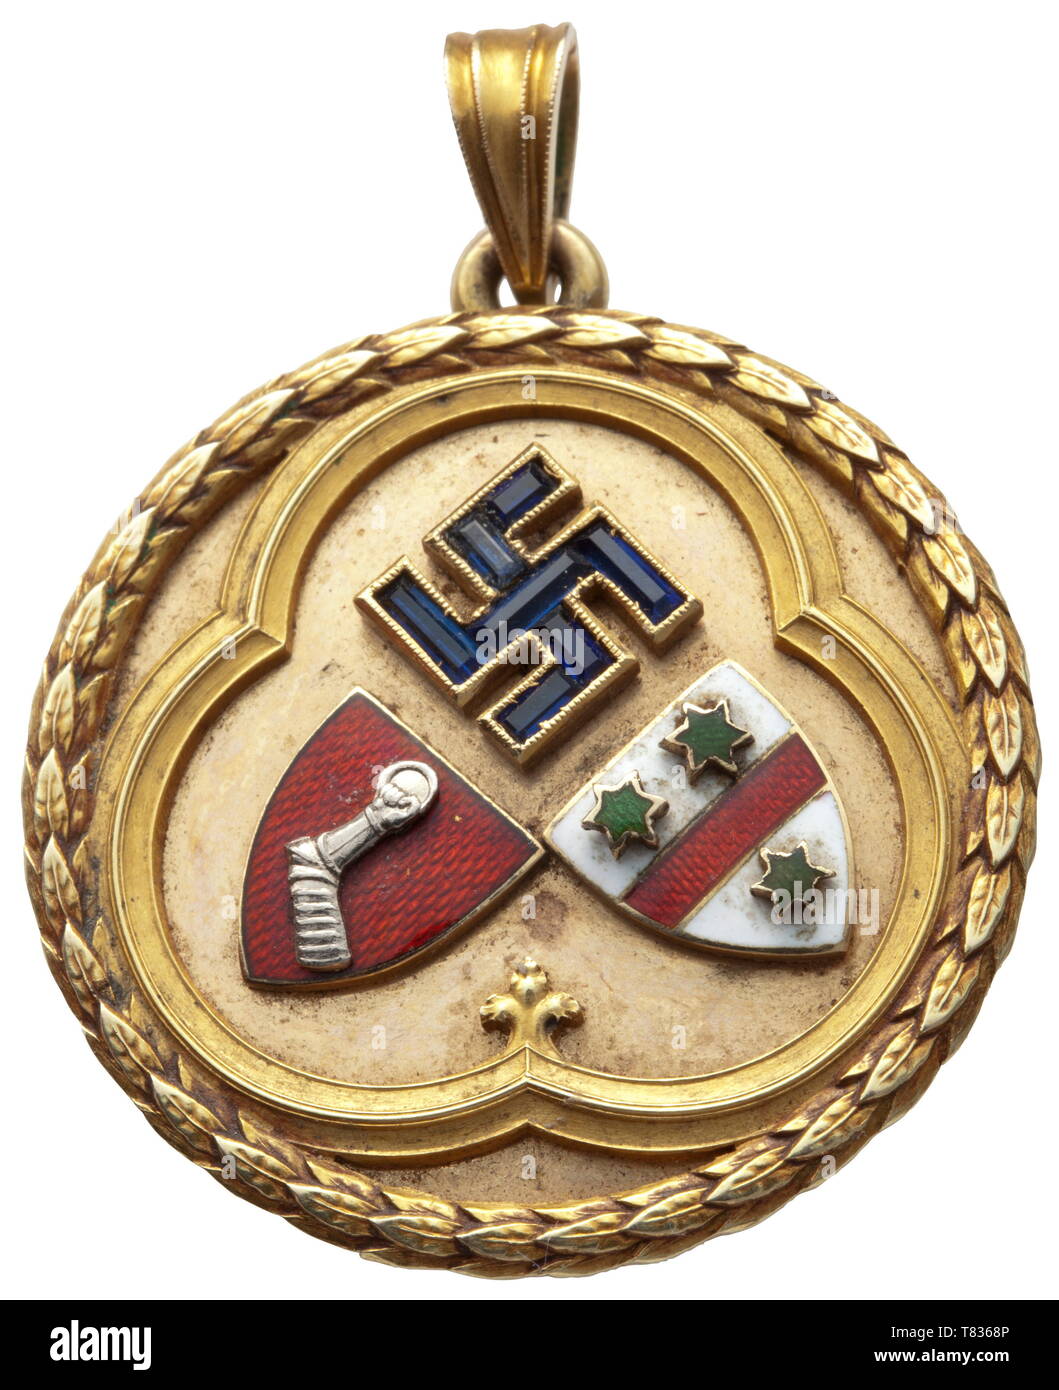 Hermann and Emmy Göring - a House Order of Loyalty, 1935 Gold, bordered by a laurel wreath. In the centre an applied swastika with set sapphires surmounting the enamelled coats of arms of the Göring and Sonnemann families, all within a Gothic trefoil. On the back the dedication engraving 'Ida Ott Für Treue Weihnachten 1935 Hermann-Emmy Göring'. Diameter 30.5 mm, 14 g. Very rare (only one very similar piece is known) distinction awarded to long-standing employees of Göring's private surroundings. historic, historical, 20th century, 1930s, NS, National Socialism, Nazism, Thir, Editorial-Use-Only Stock Photo